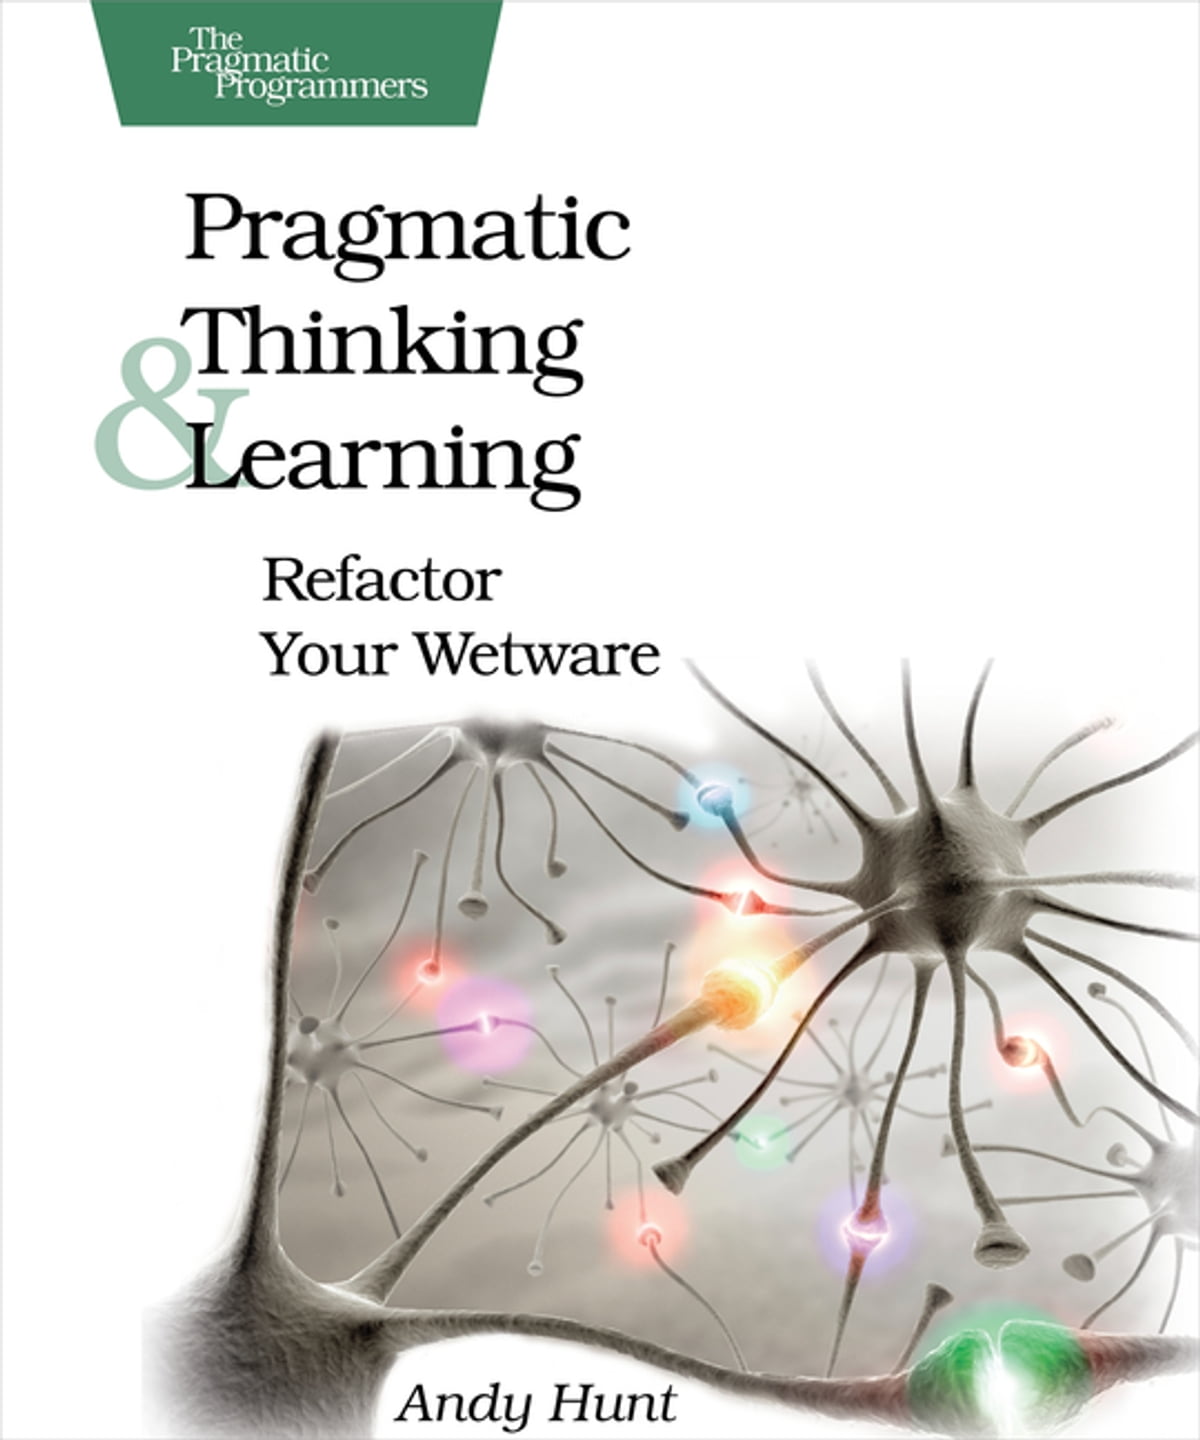 Pragmatic Thinking and Learning: Refactor Your Wetware (Pragmatic Programmers) 1st Edition by Andy Hunt